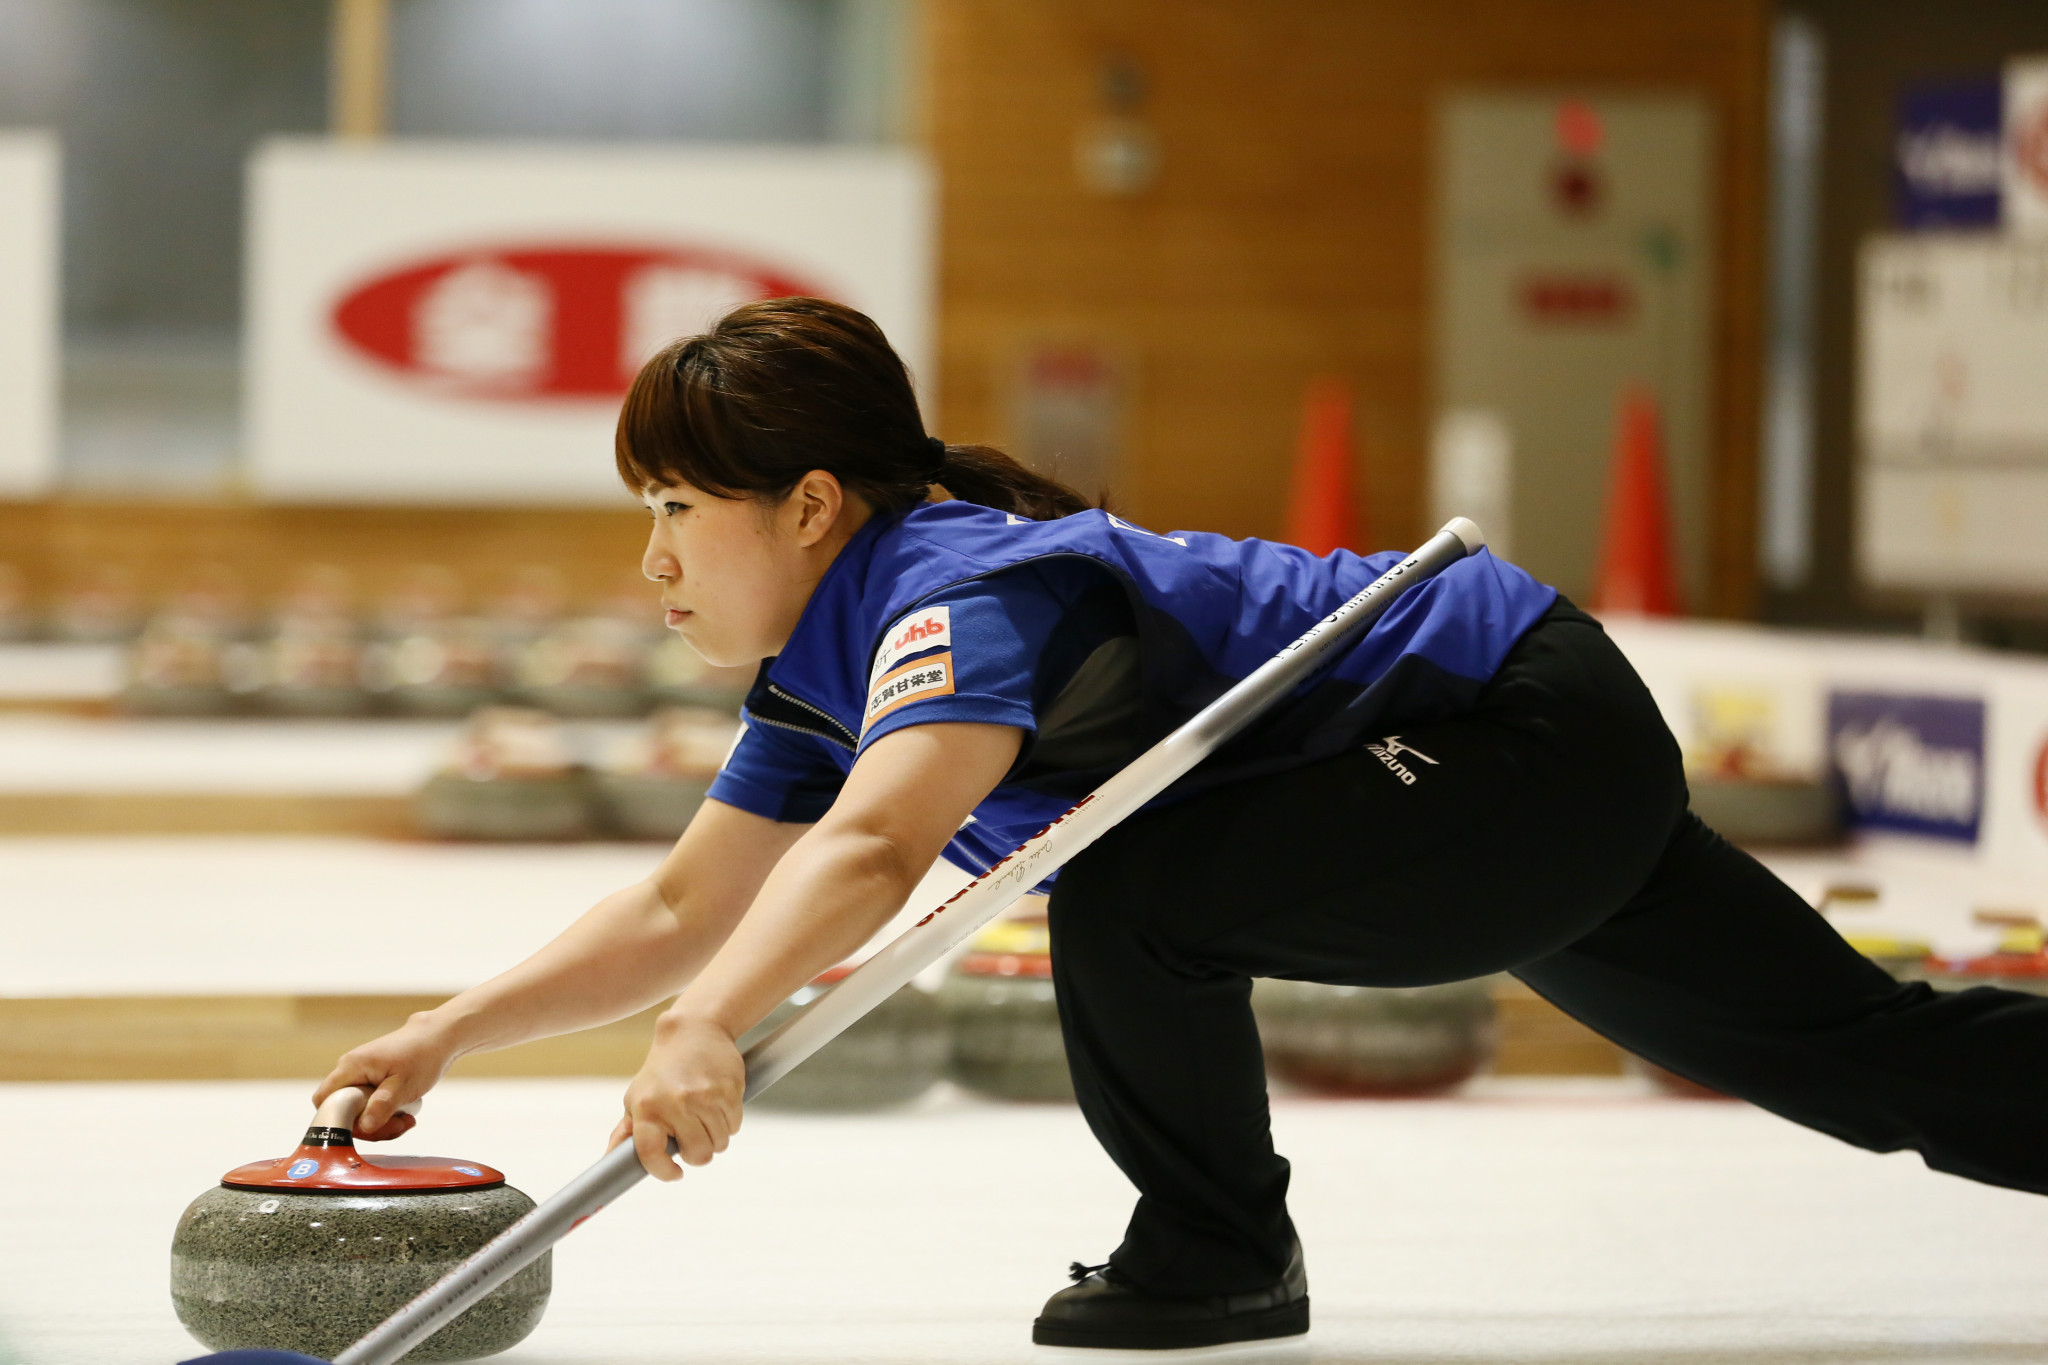 LS Kitami will represent Japan in the women’s curling event at the Pyeongchang 2018 Winter Olympic Games ©Getty Images